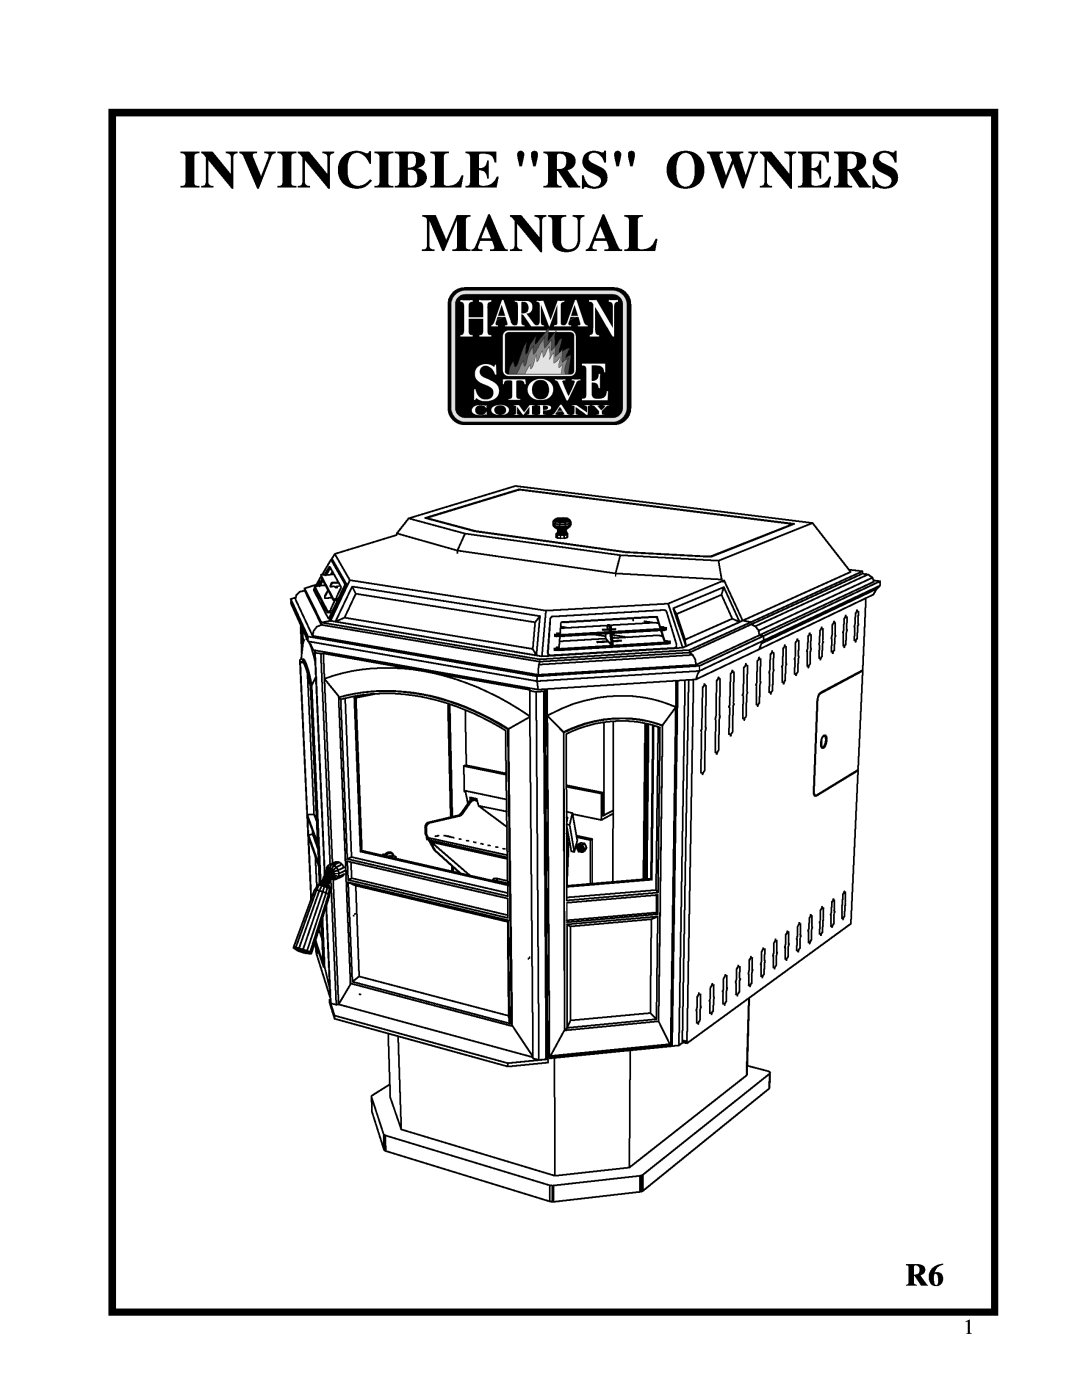 Harman Stove Company R6 owner manual Invincible Rs Owners, Manual 